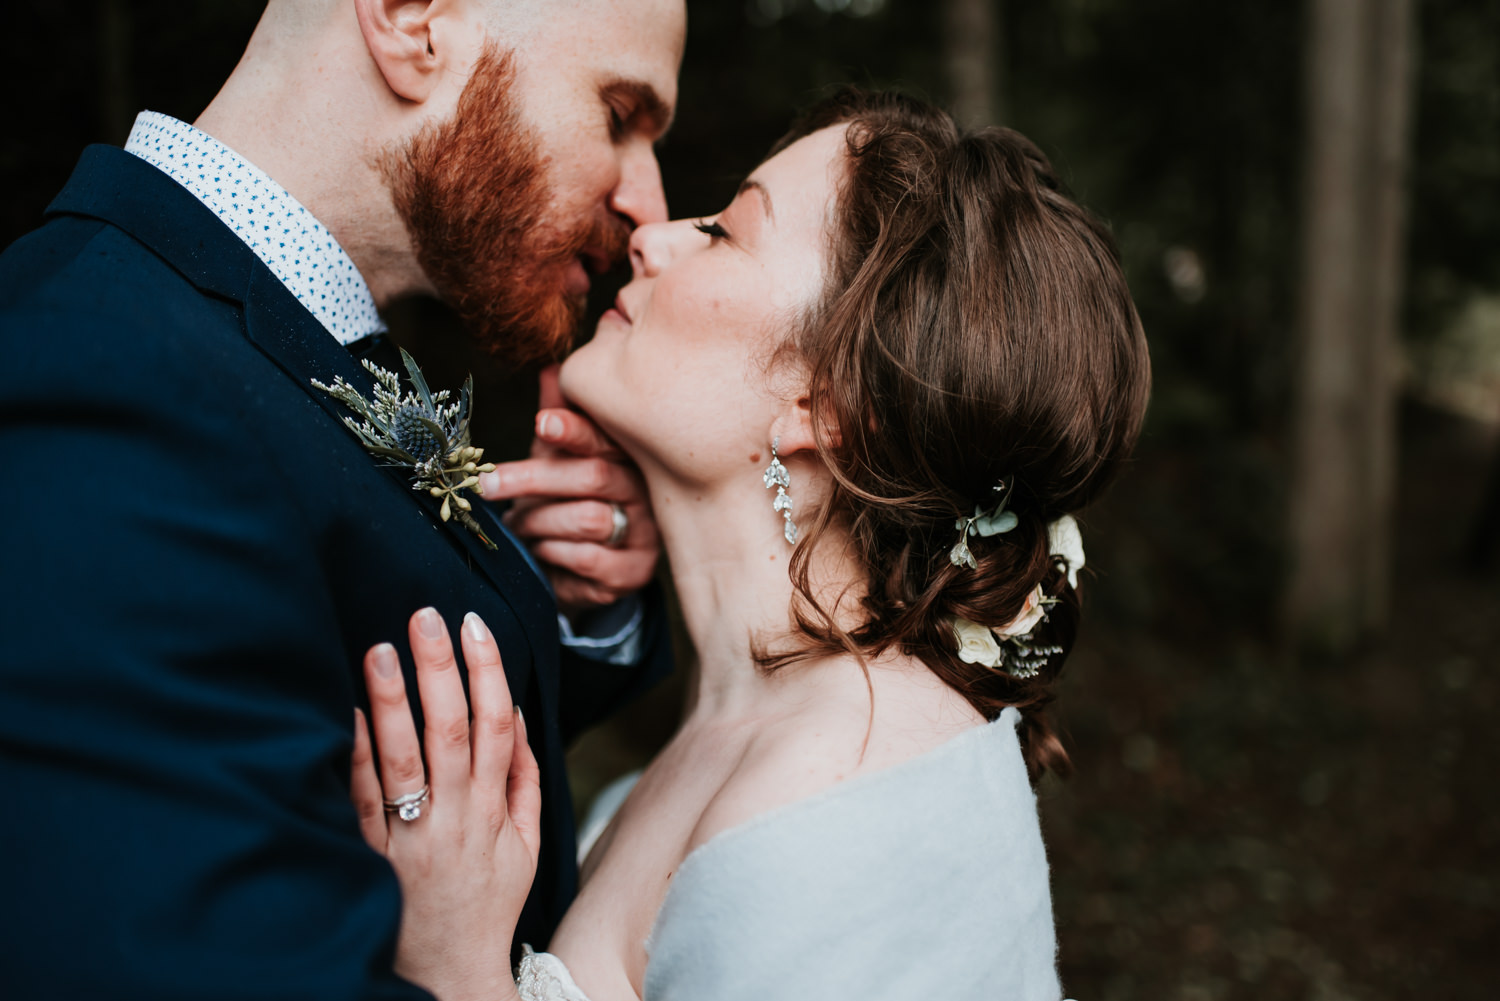 A Whistler elopement on the West Coast of Canada